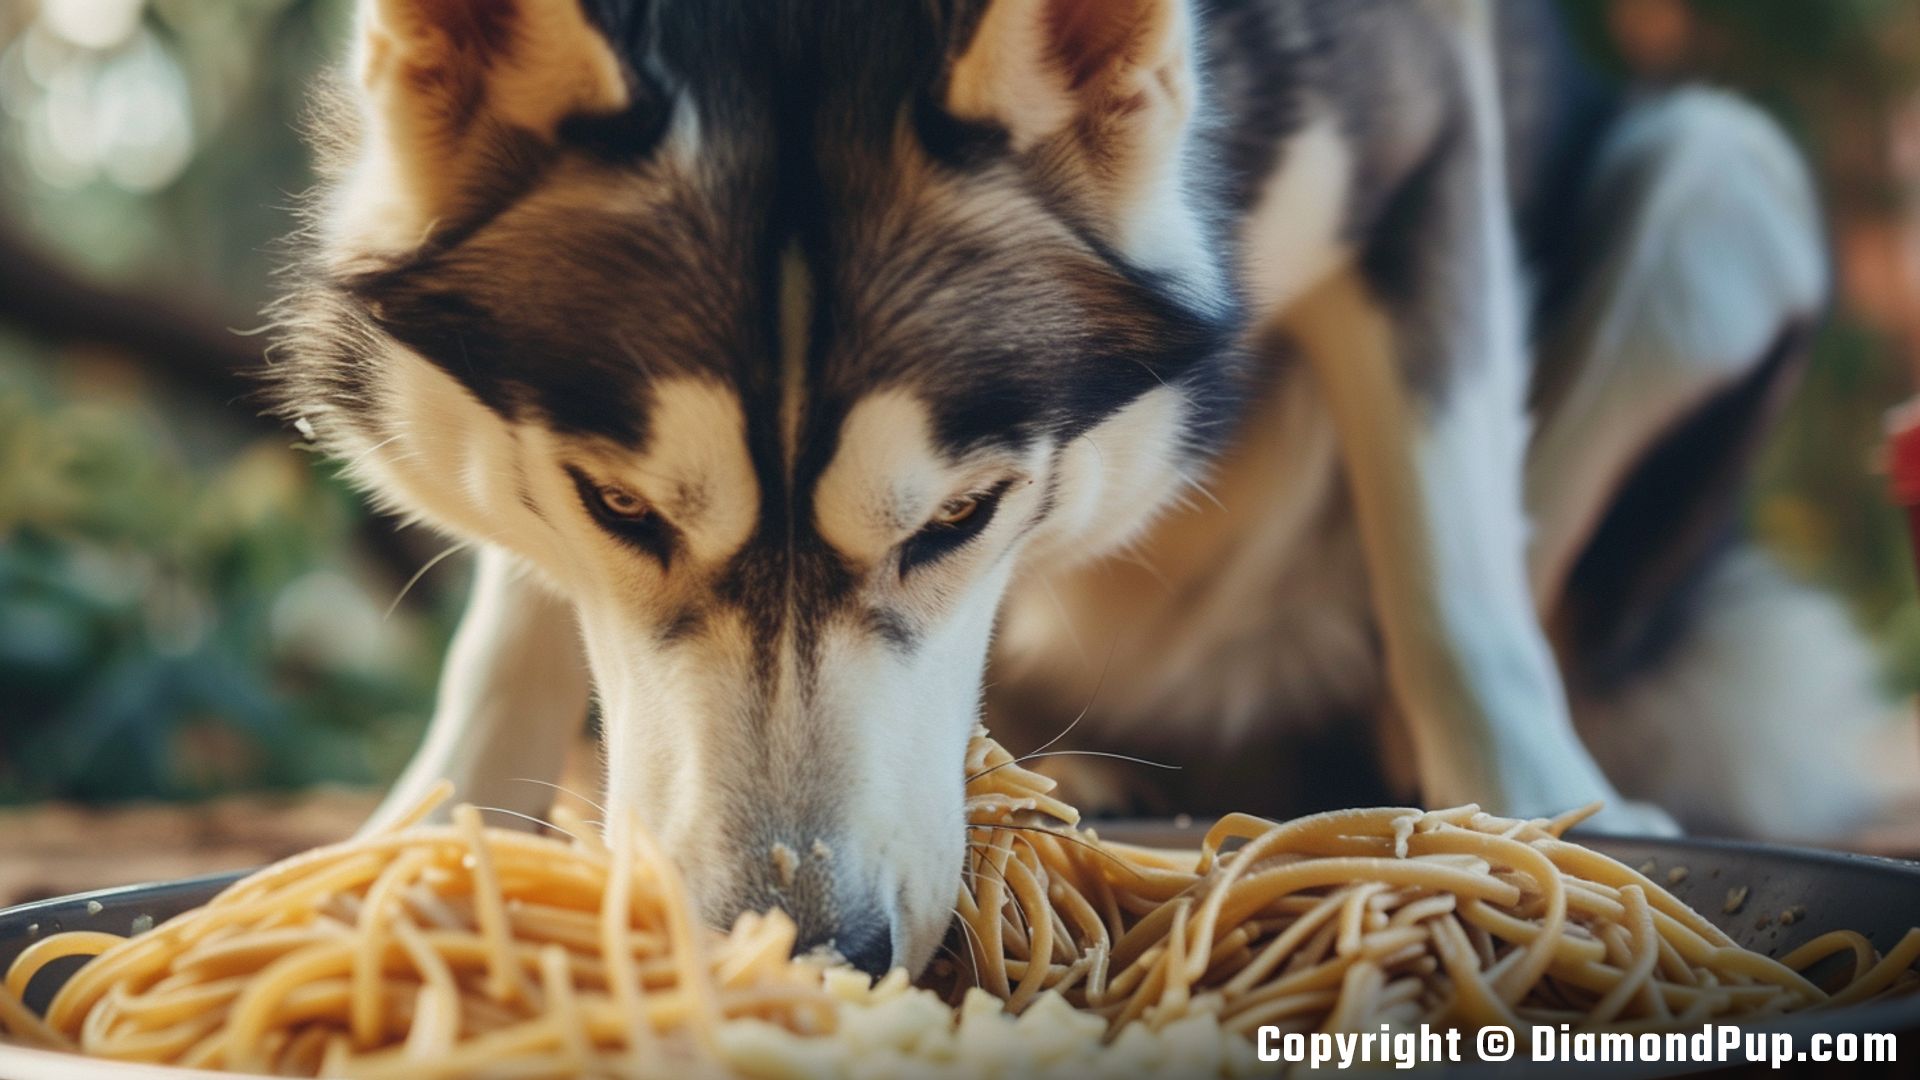 Image of a Cute Husky Eating Pasta